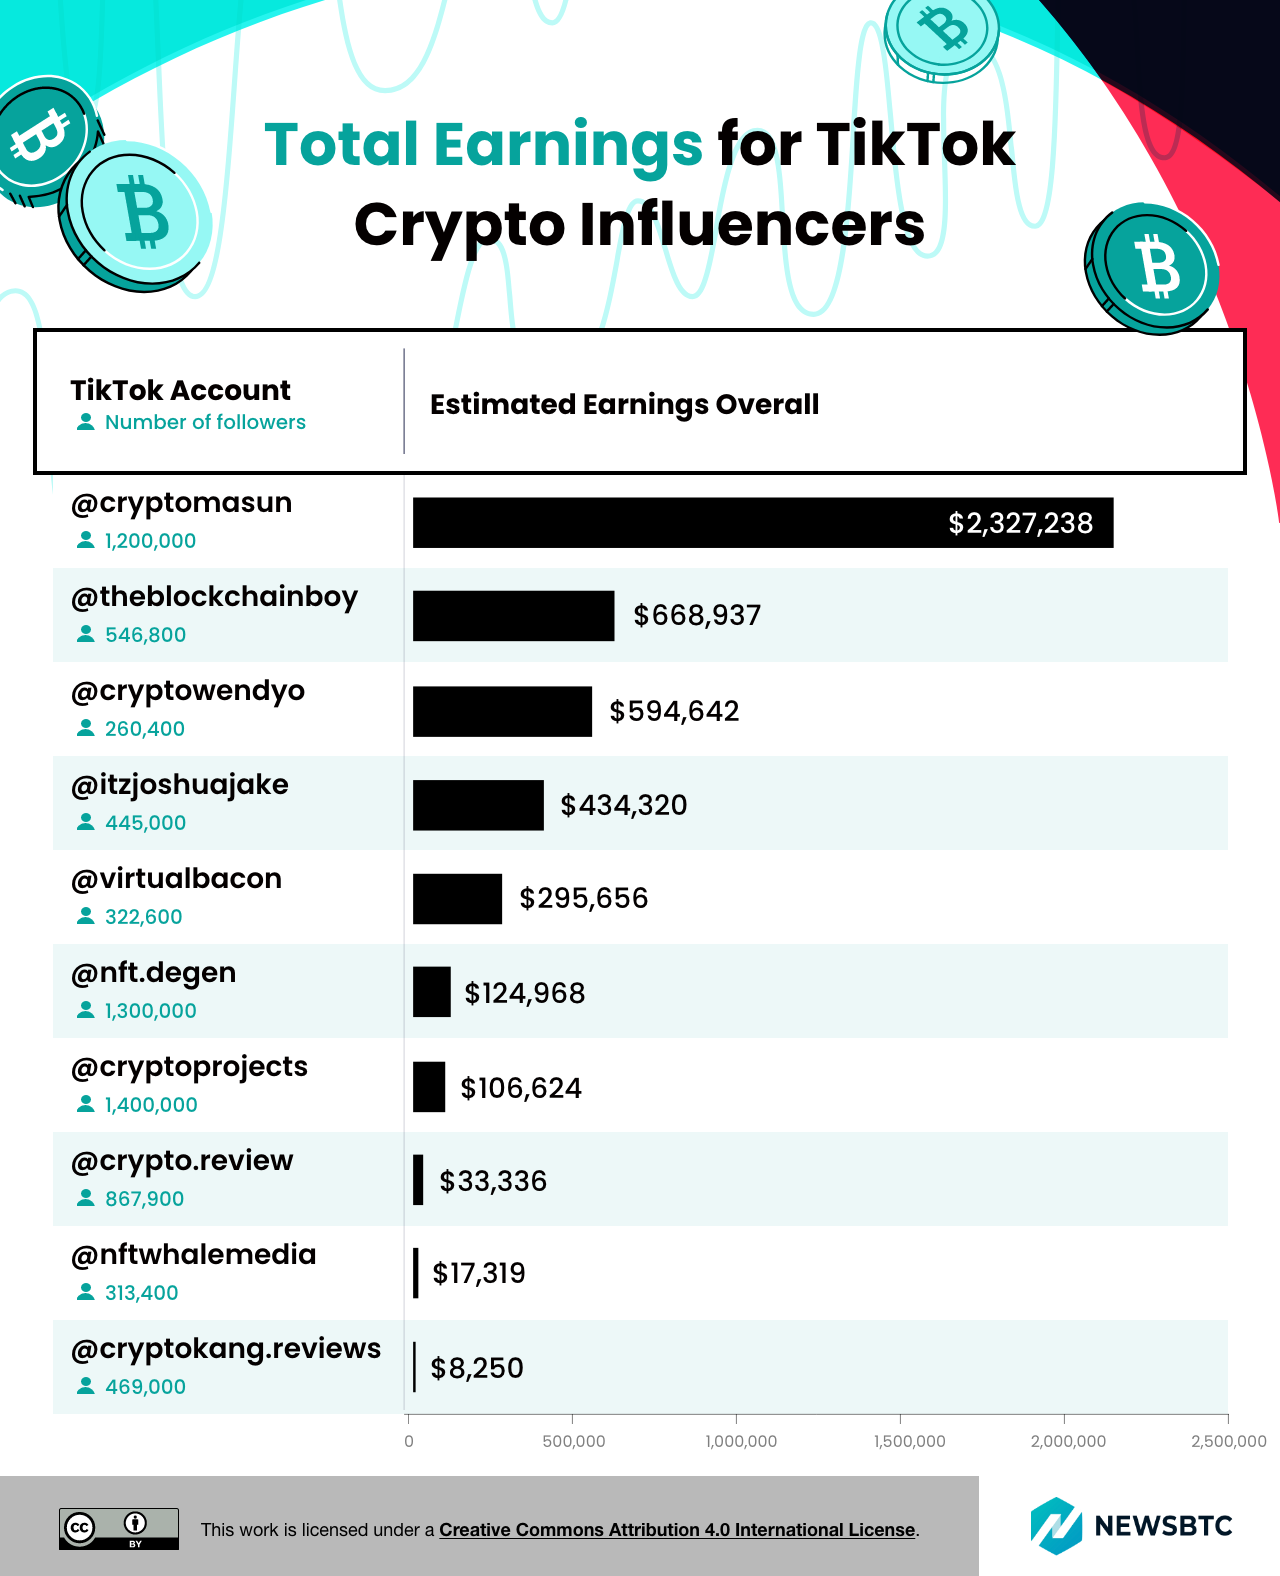 Total earnings for TikTok crypto influencers